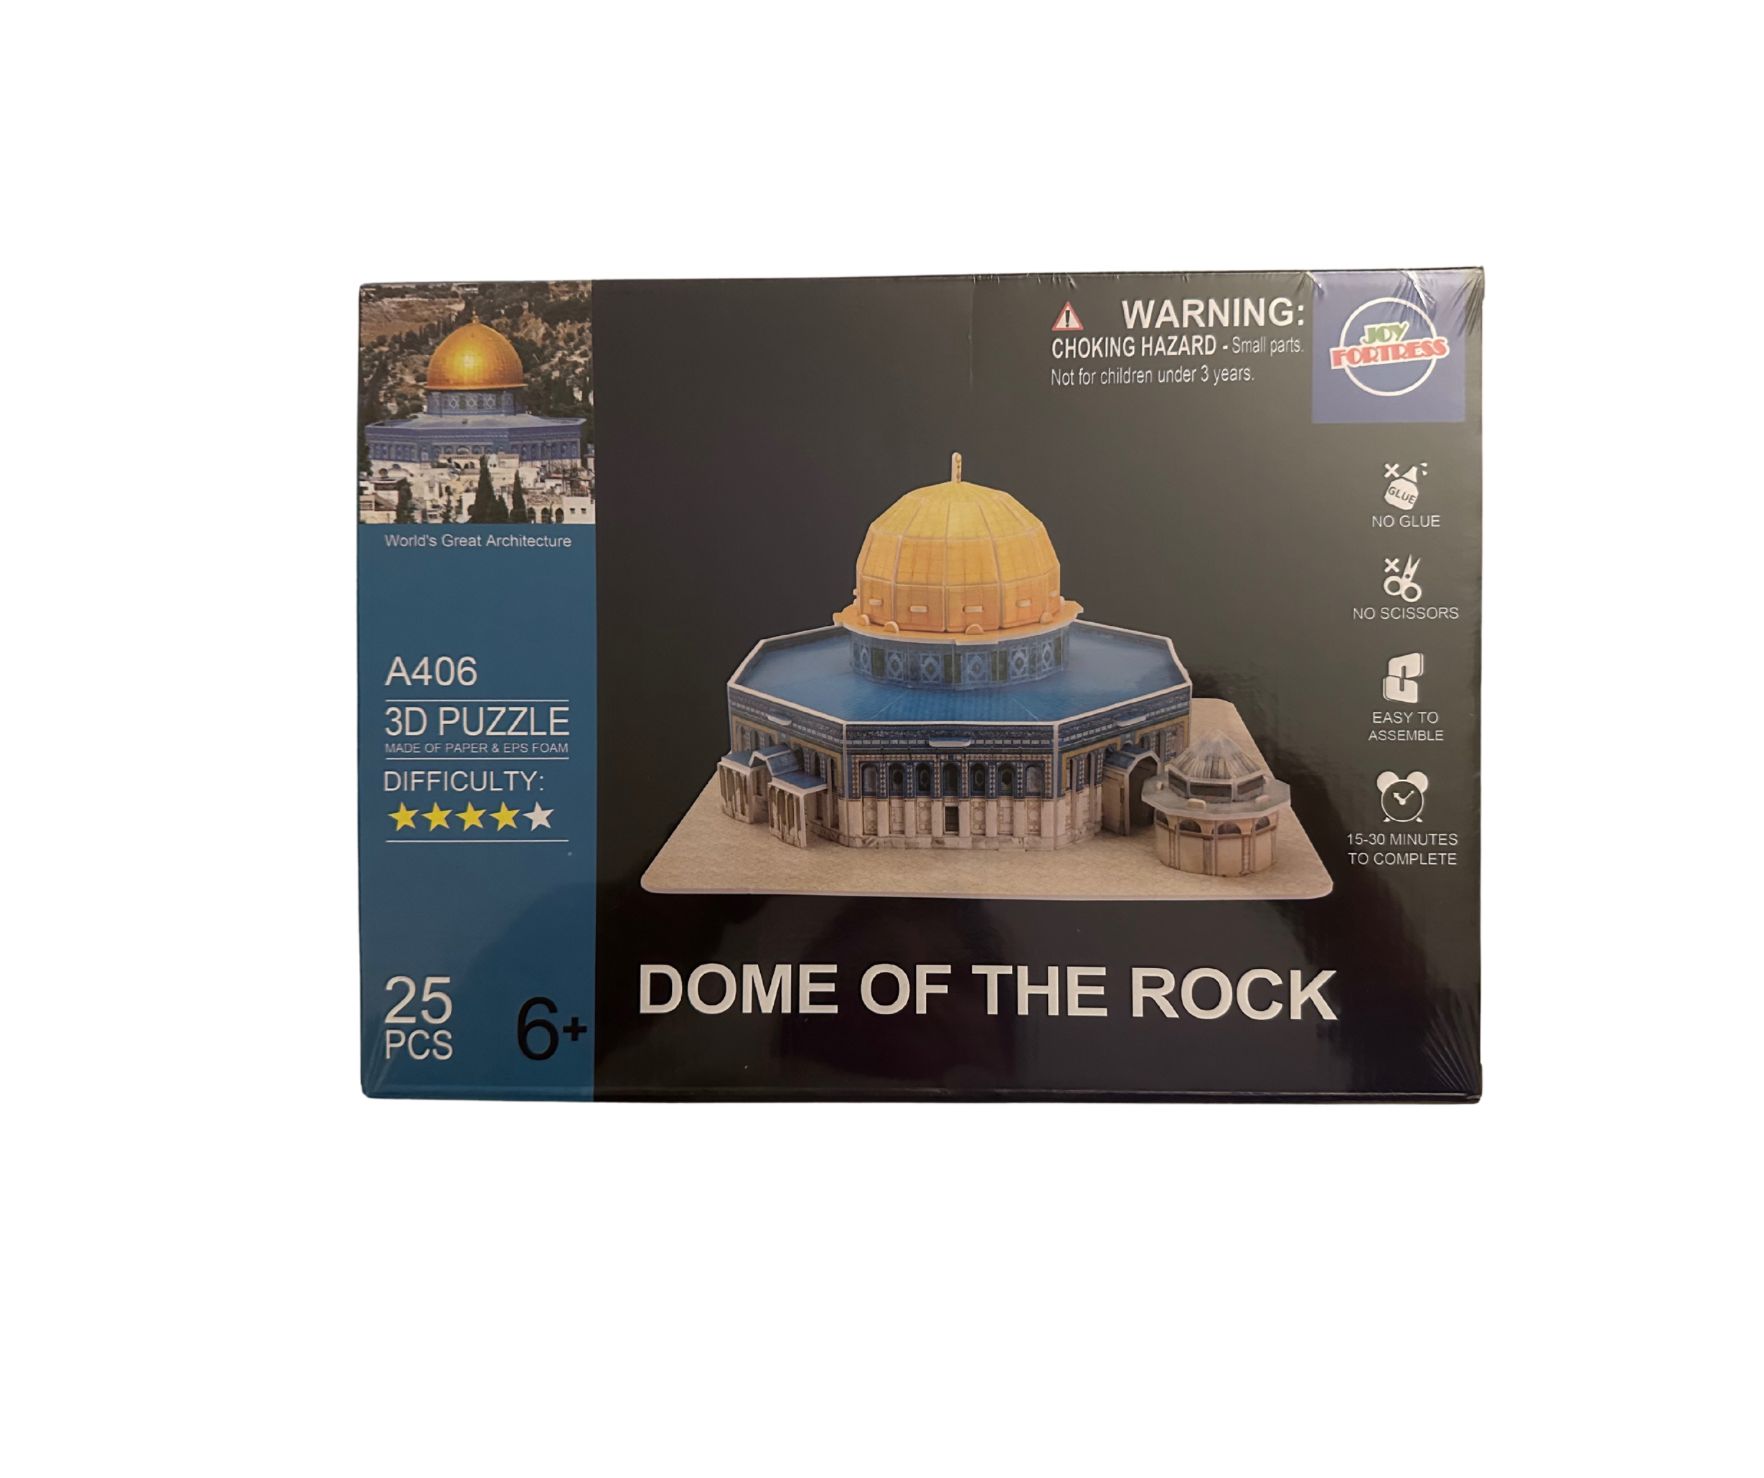 3D Puzzle of the Dome of the Rock | Educational and Decorative Model for Muslim Families